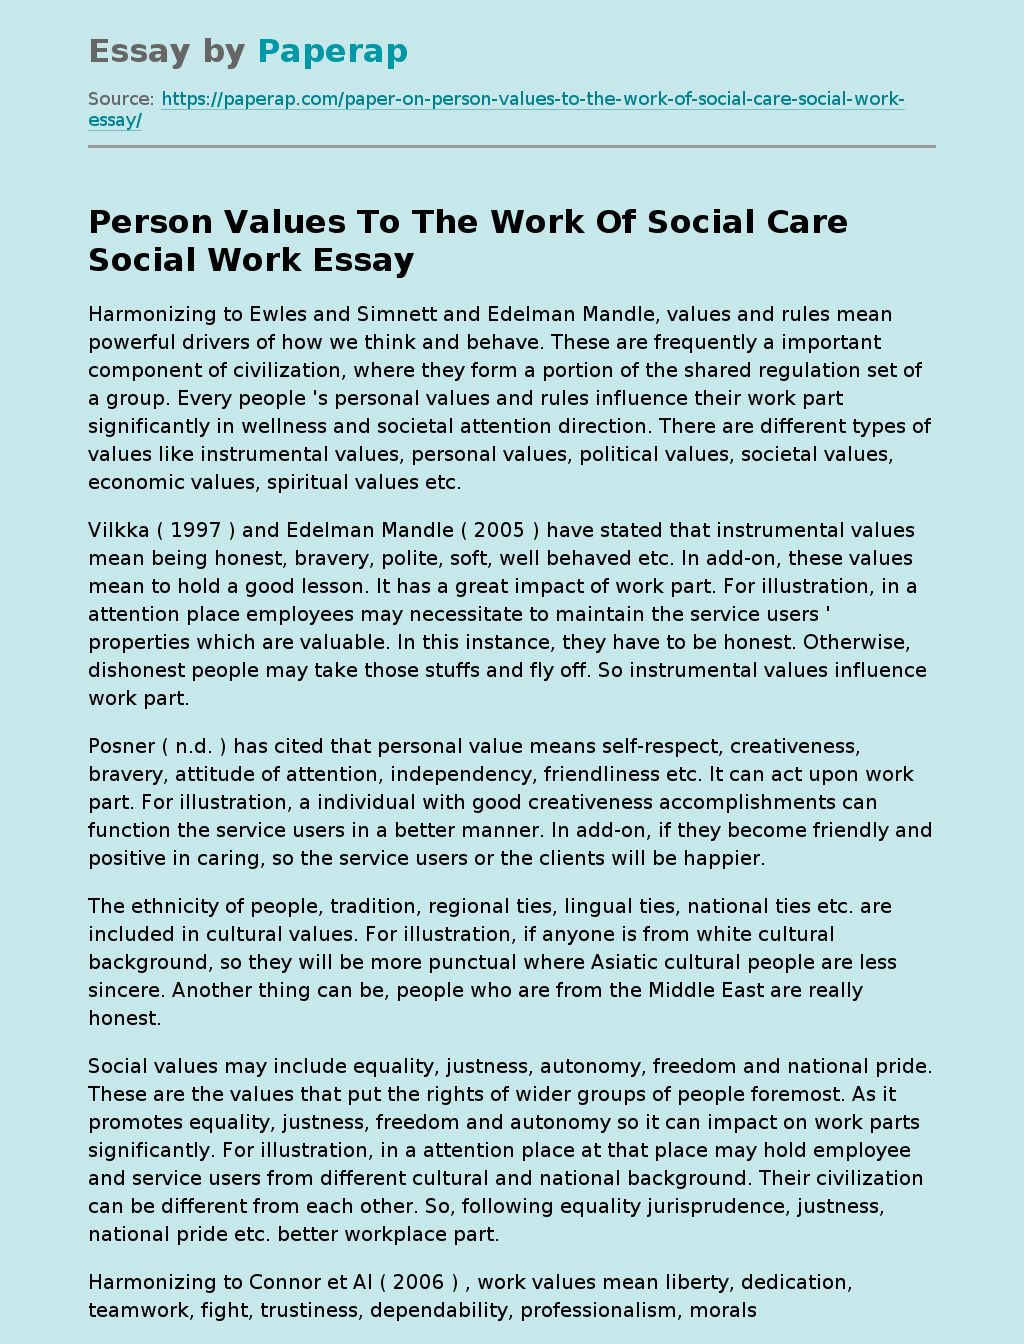 social work is a work of heart essay